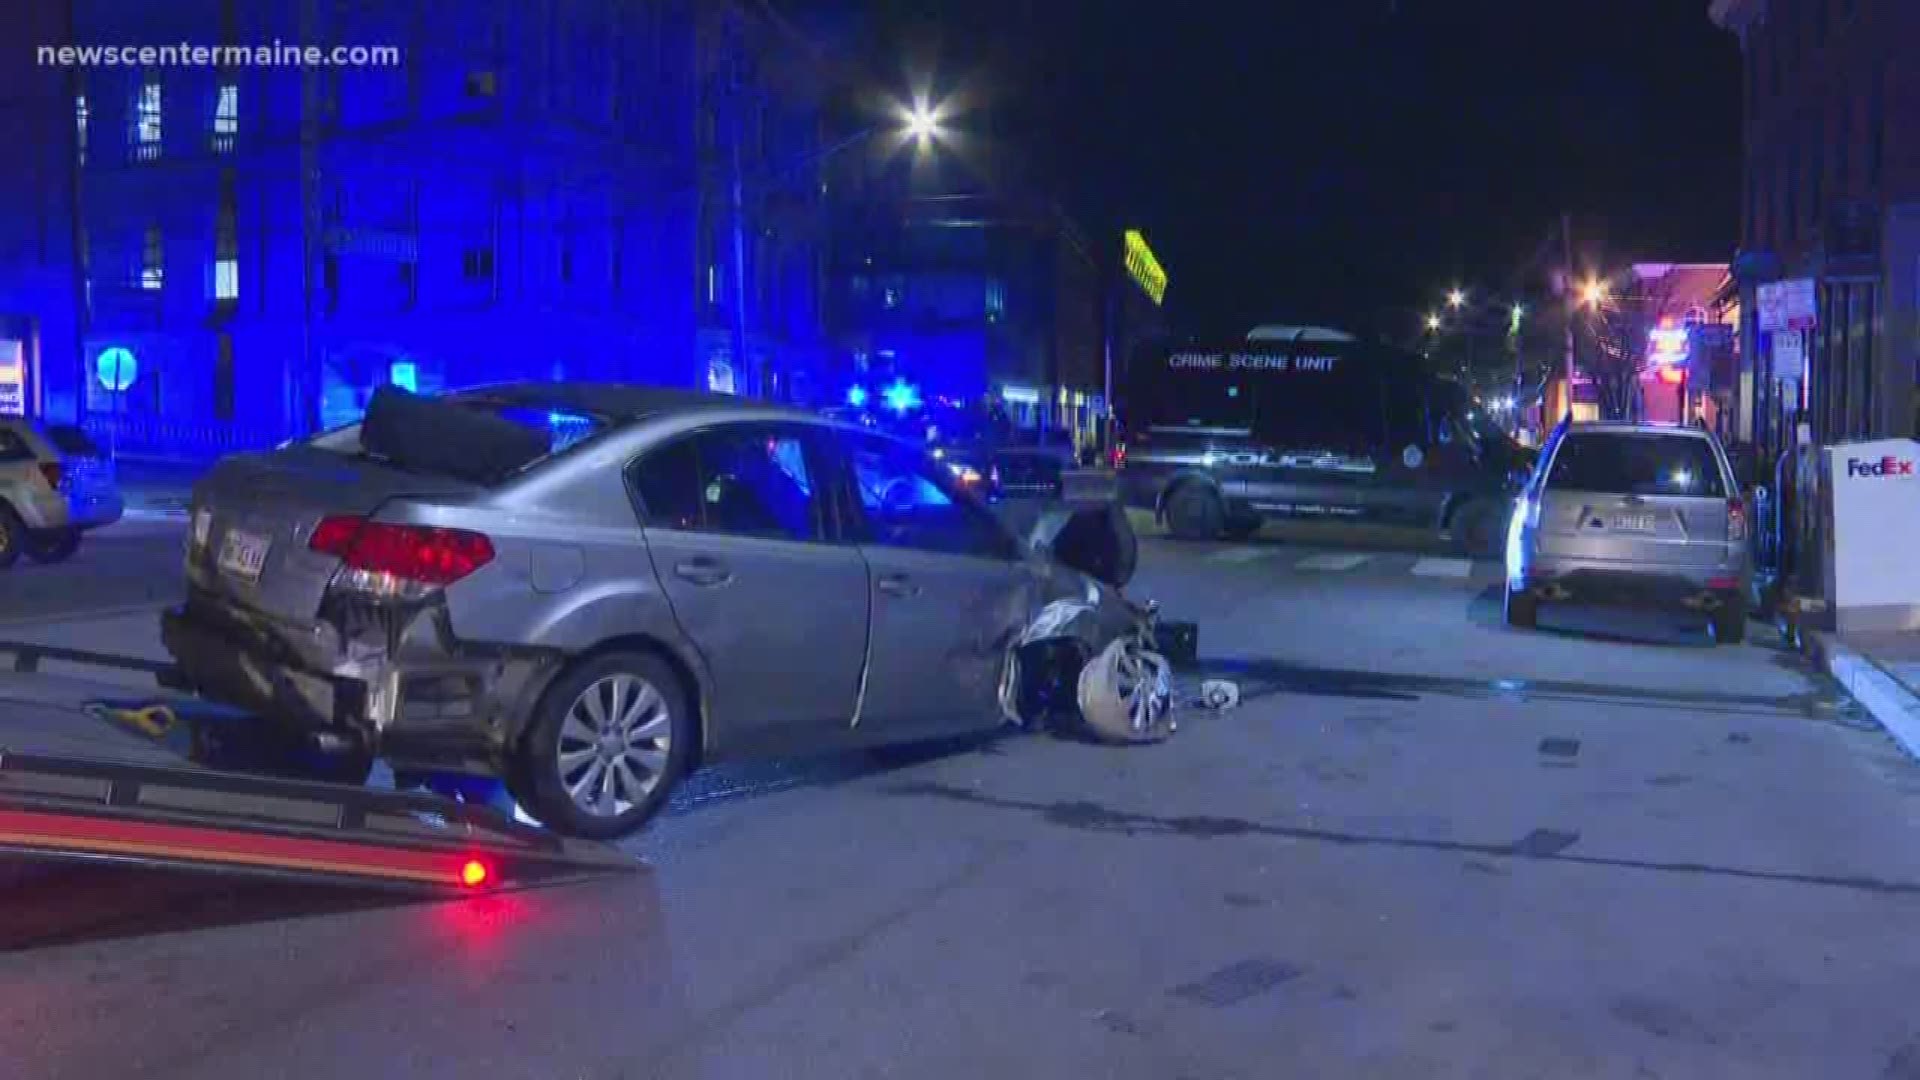 Police say speed and alcohol were factors in a crash involving 7 cars in Portland Wednesday night.